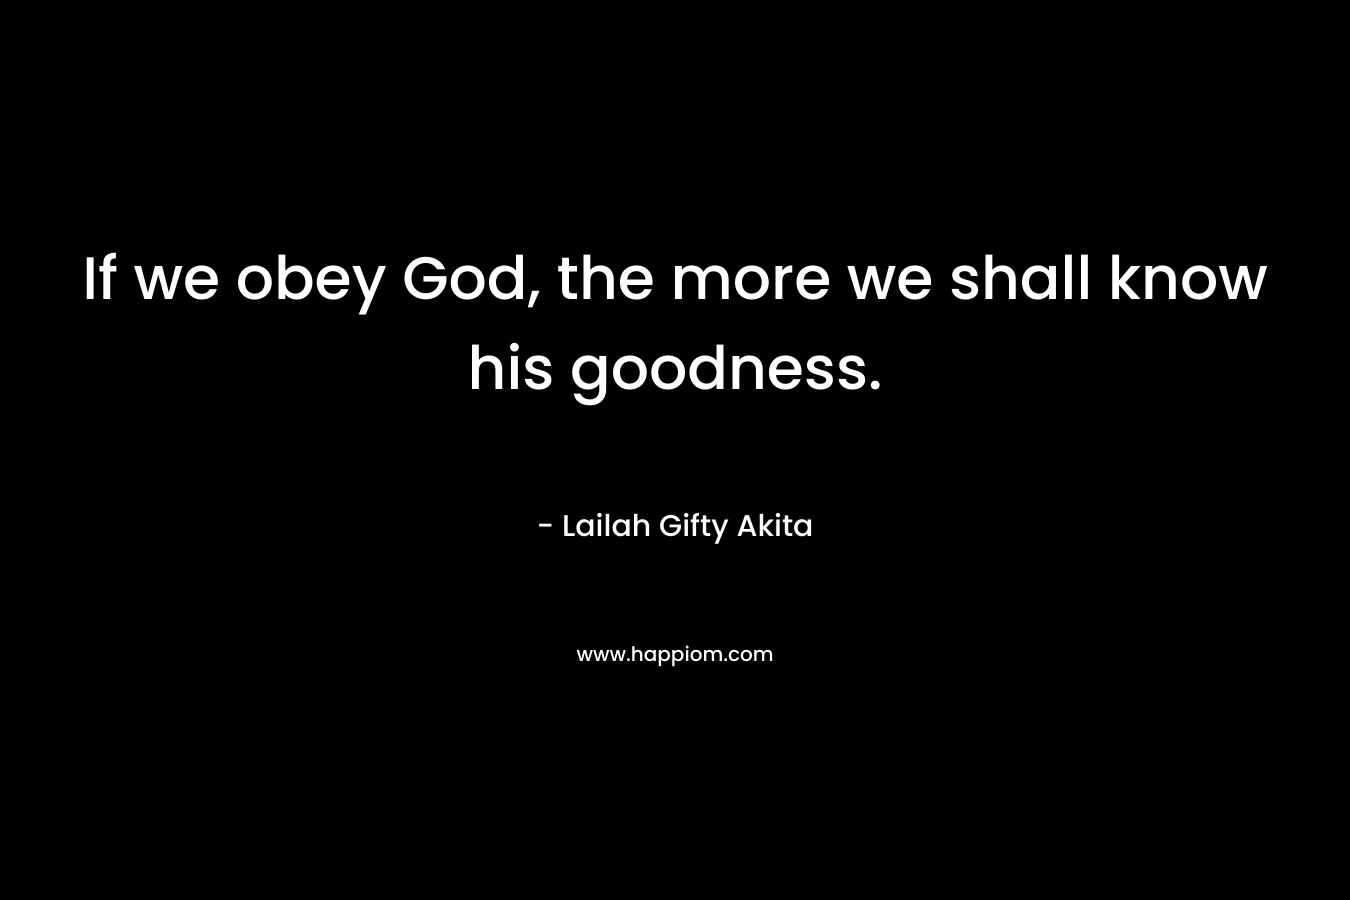 If we obey God, the more we shall know his goodness.